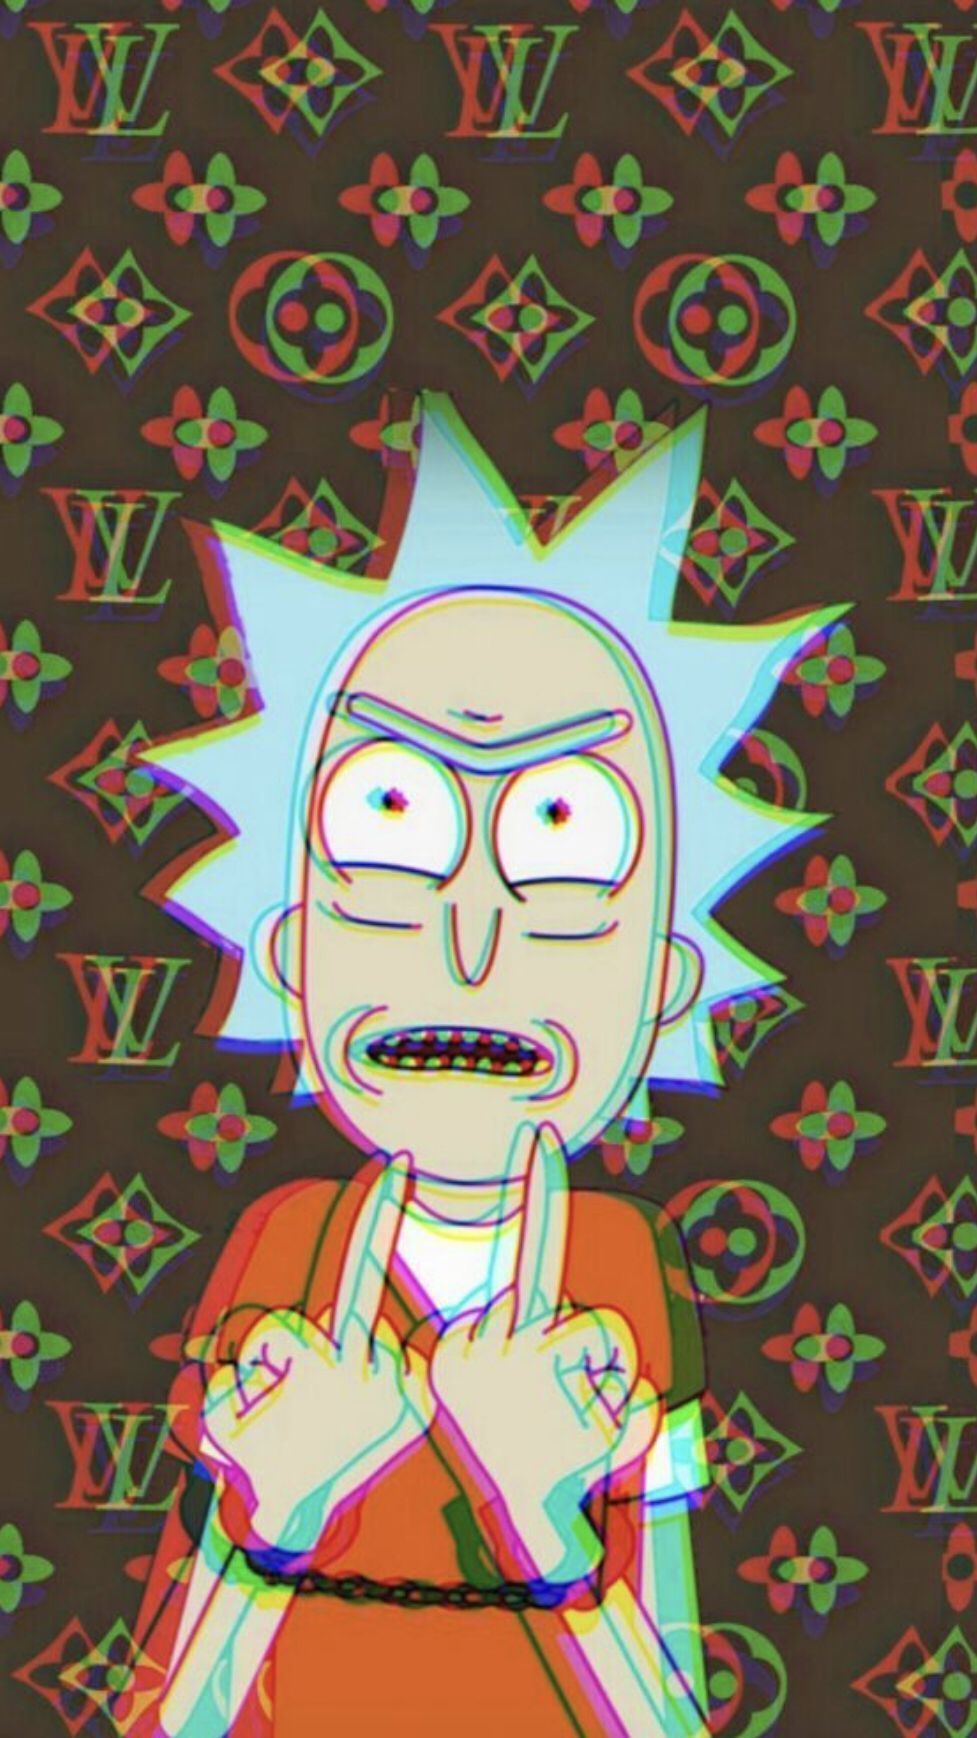 Aesthetic rick and morty wallpaper for phone and desktop. - Rick and Morty